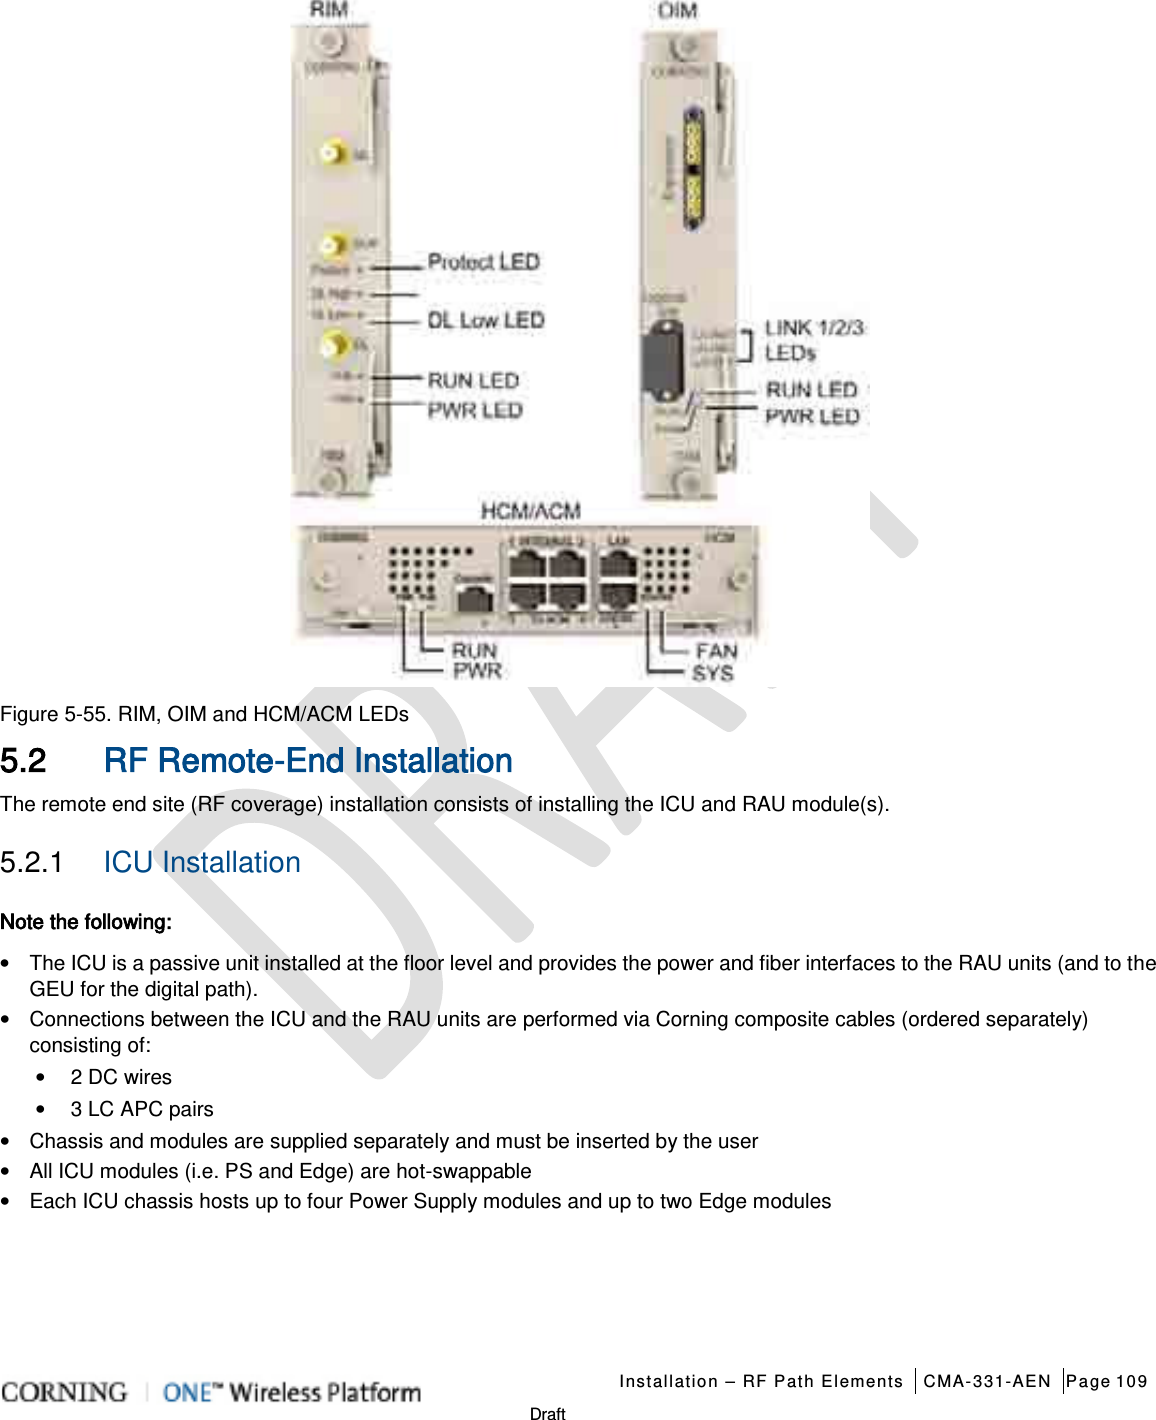   Installation – RF Path Elements CMA-331-AEN Page 109   Draft  Figure  5-55. RIM, OIM and HCM/ACM LEDs 5.2 RF Remote-End Installation The remote end site (RF coverage) installation consists of installing the ICU and RAU module(s).  5.2.1  ICU Installation Note the following: • The ICU is a passive unit installed at the floor level and provides the power and fiber interfaces to the RAU units (and to the GEU for the digital path).   • Connections between the ICU and the RAU units are performed via Corning composite cables (ordered separately) consisting of: • 2 DC wires •  3 LC APC pairs •  Chassis and modules are supplied separately and must be inserted by the user   • All ICU modules (i.e. PS and Edge) are hot-swappable • Each ICU chassis hosts up to four Power Supply modules and up to two Edge modules   